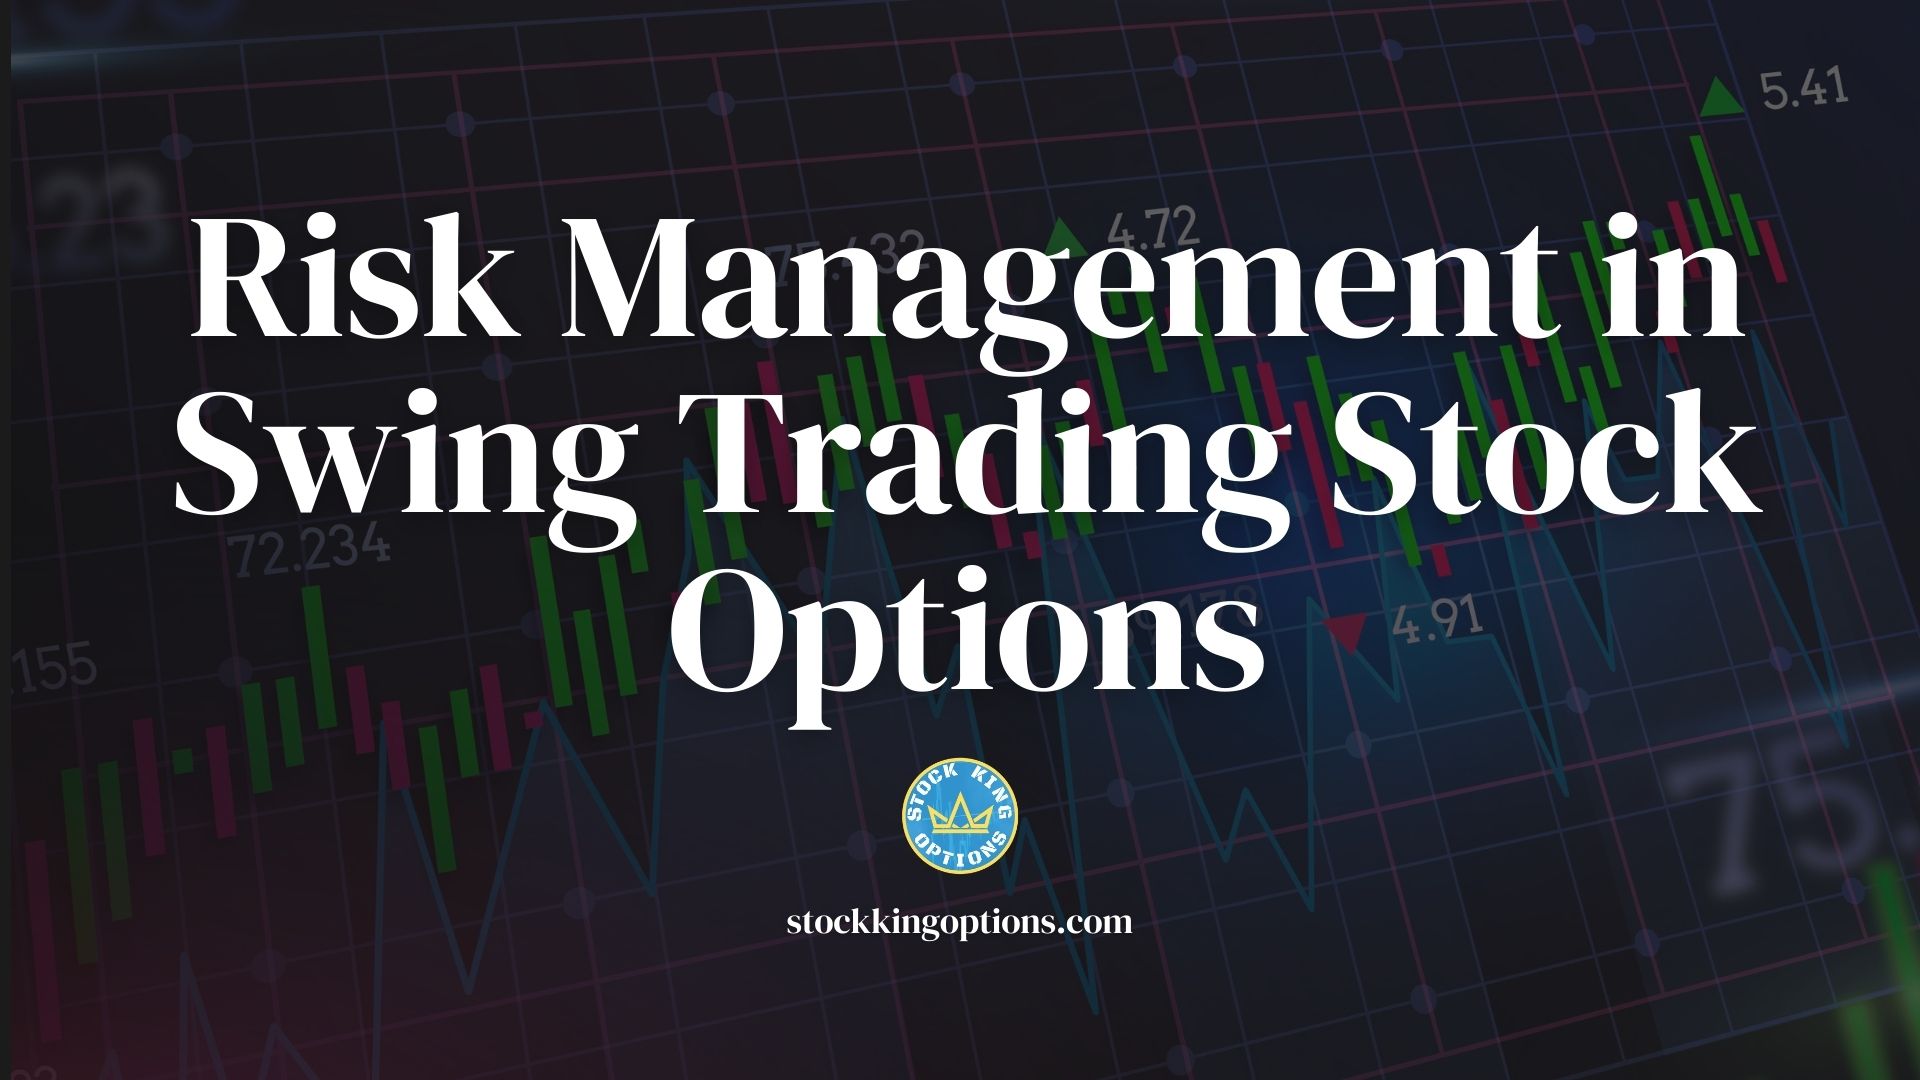 Risk Management in Swing Trading Stock Options